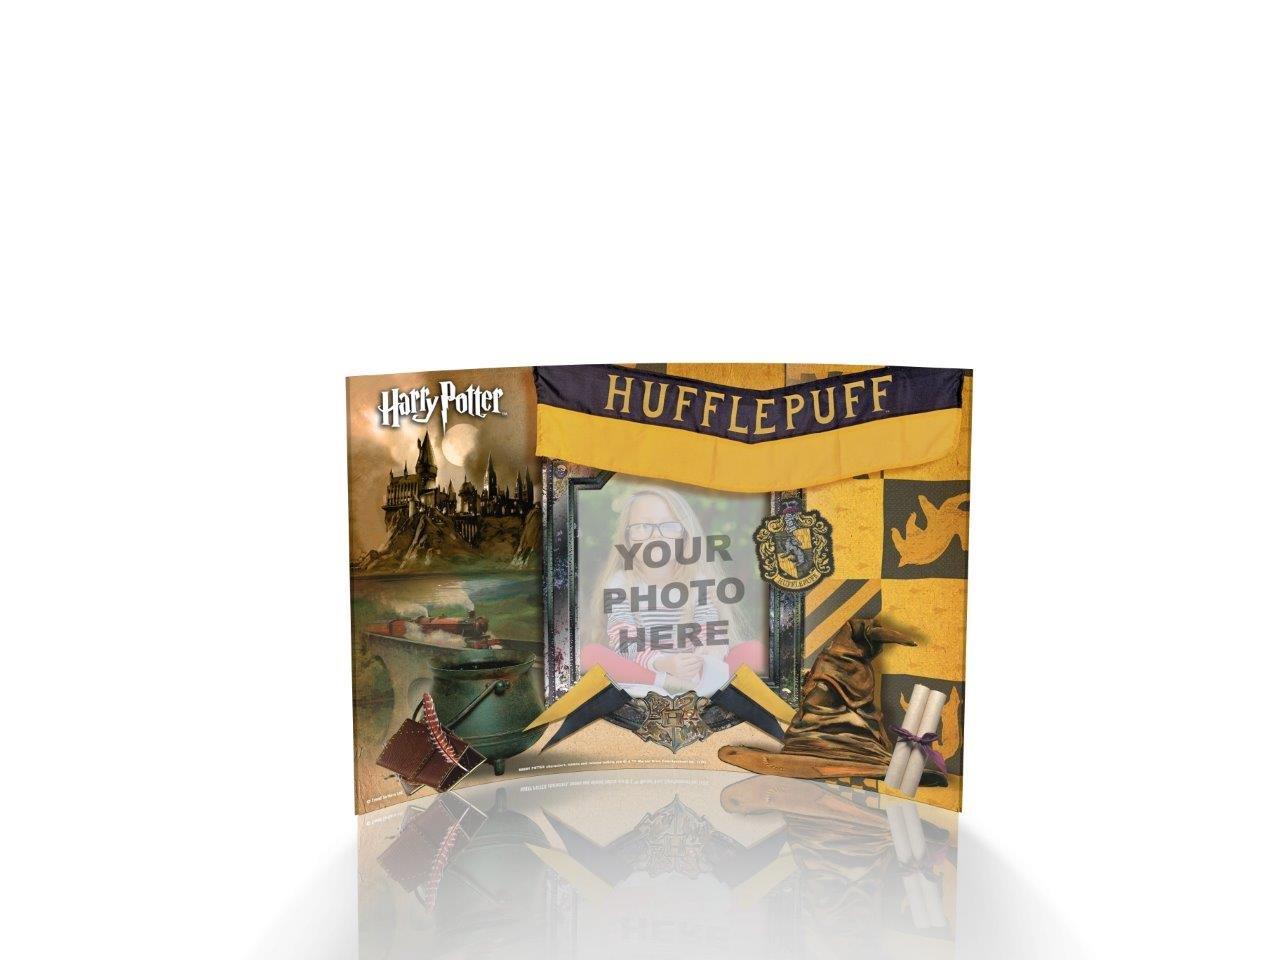 Harry Potter (Hufflepuff Sorting Hat - Personalized)  7" x 5" Curved Acrylic Print